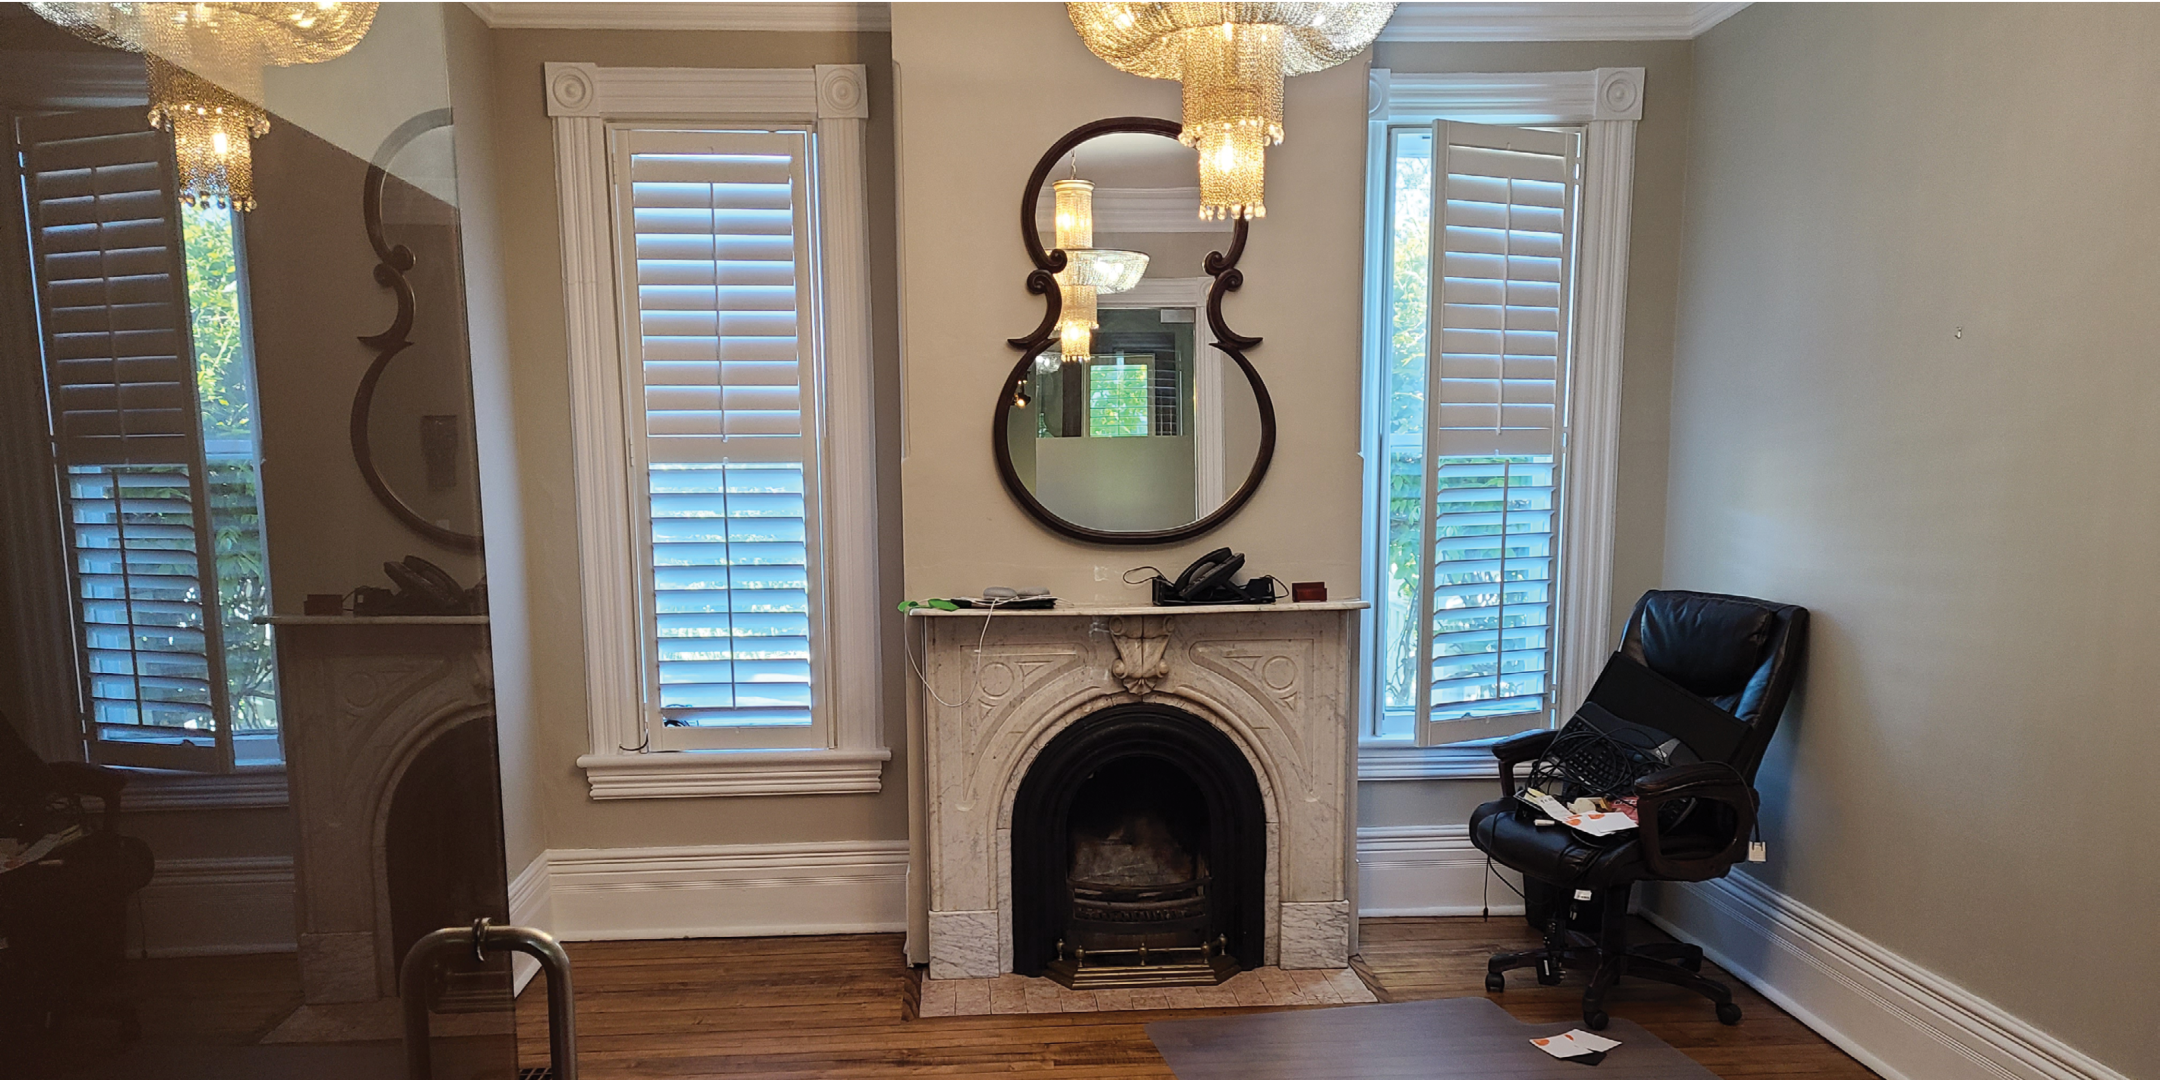 162 Main Street N lounge area with fireplace, vintage mirror and two windows